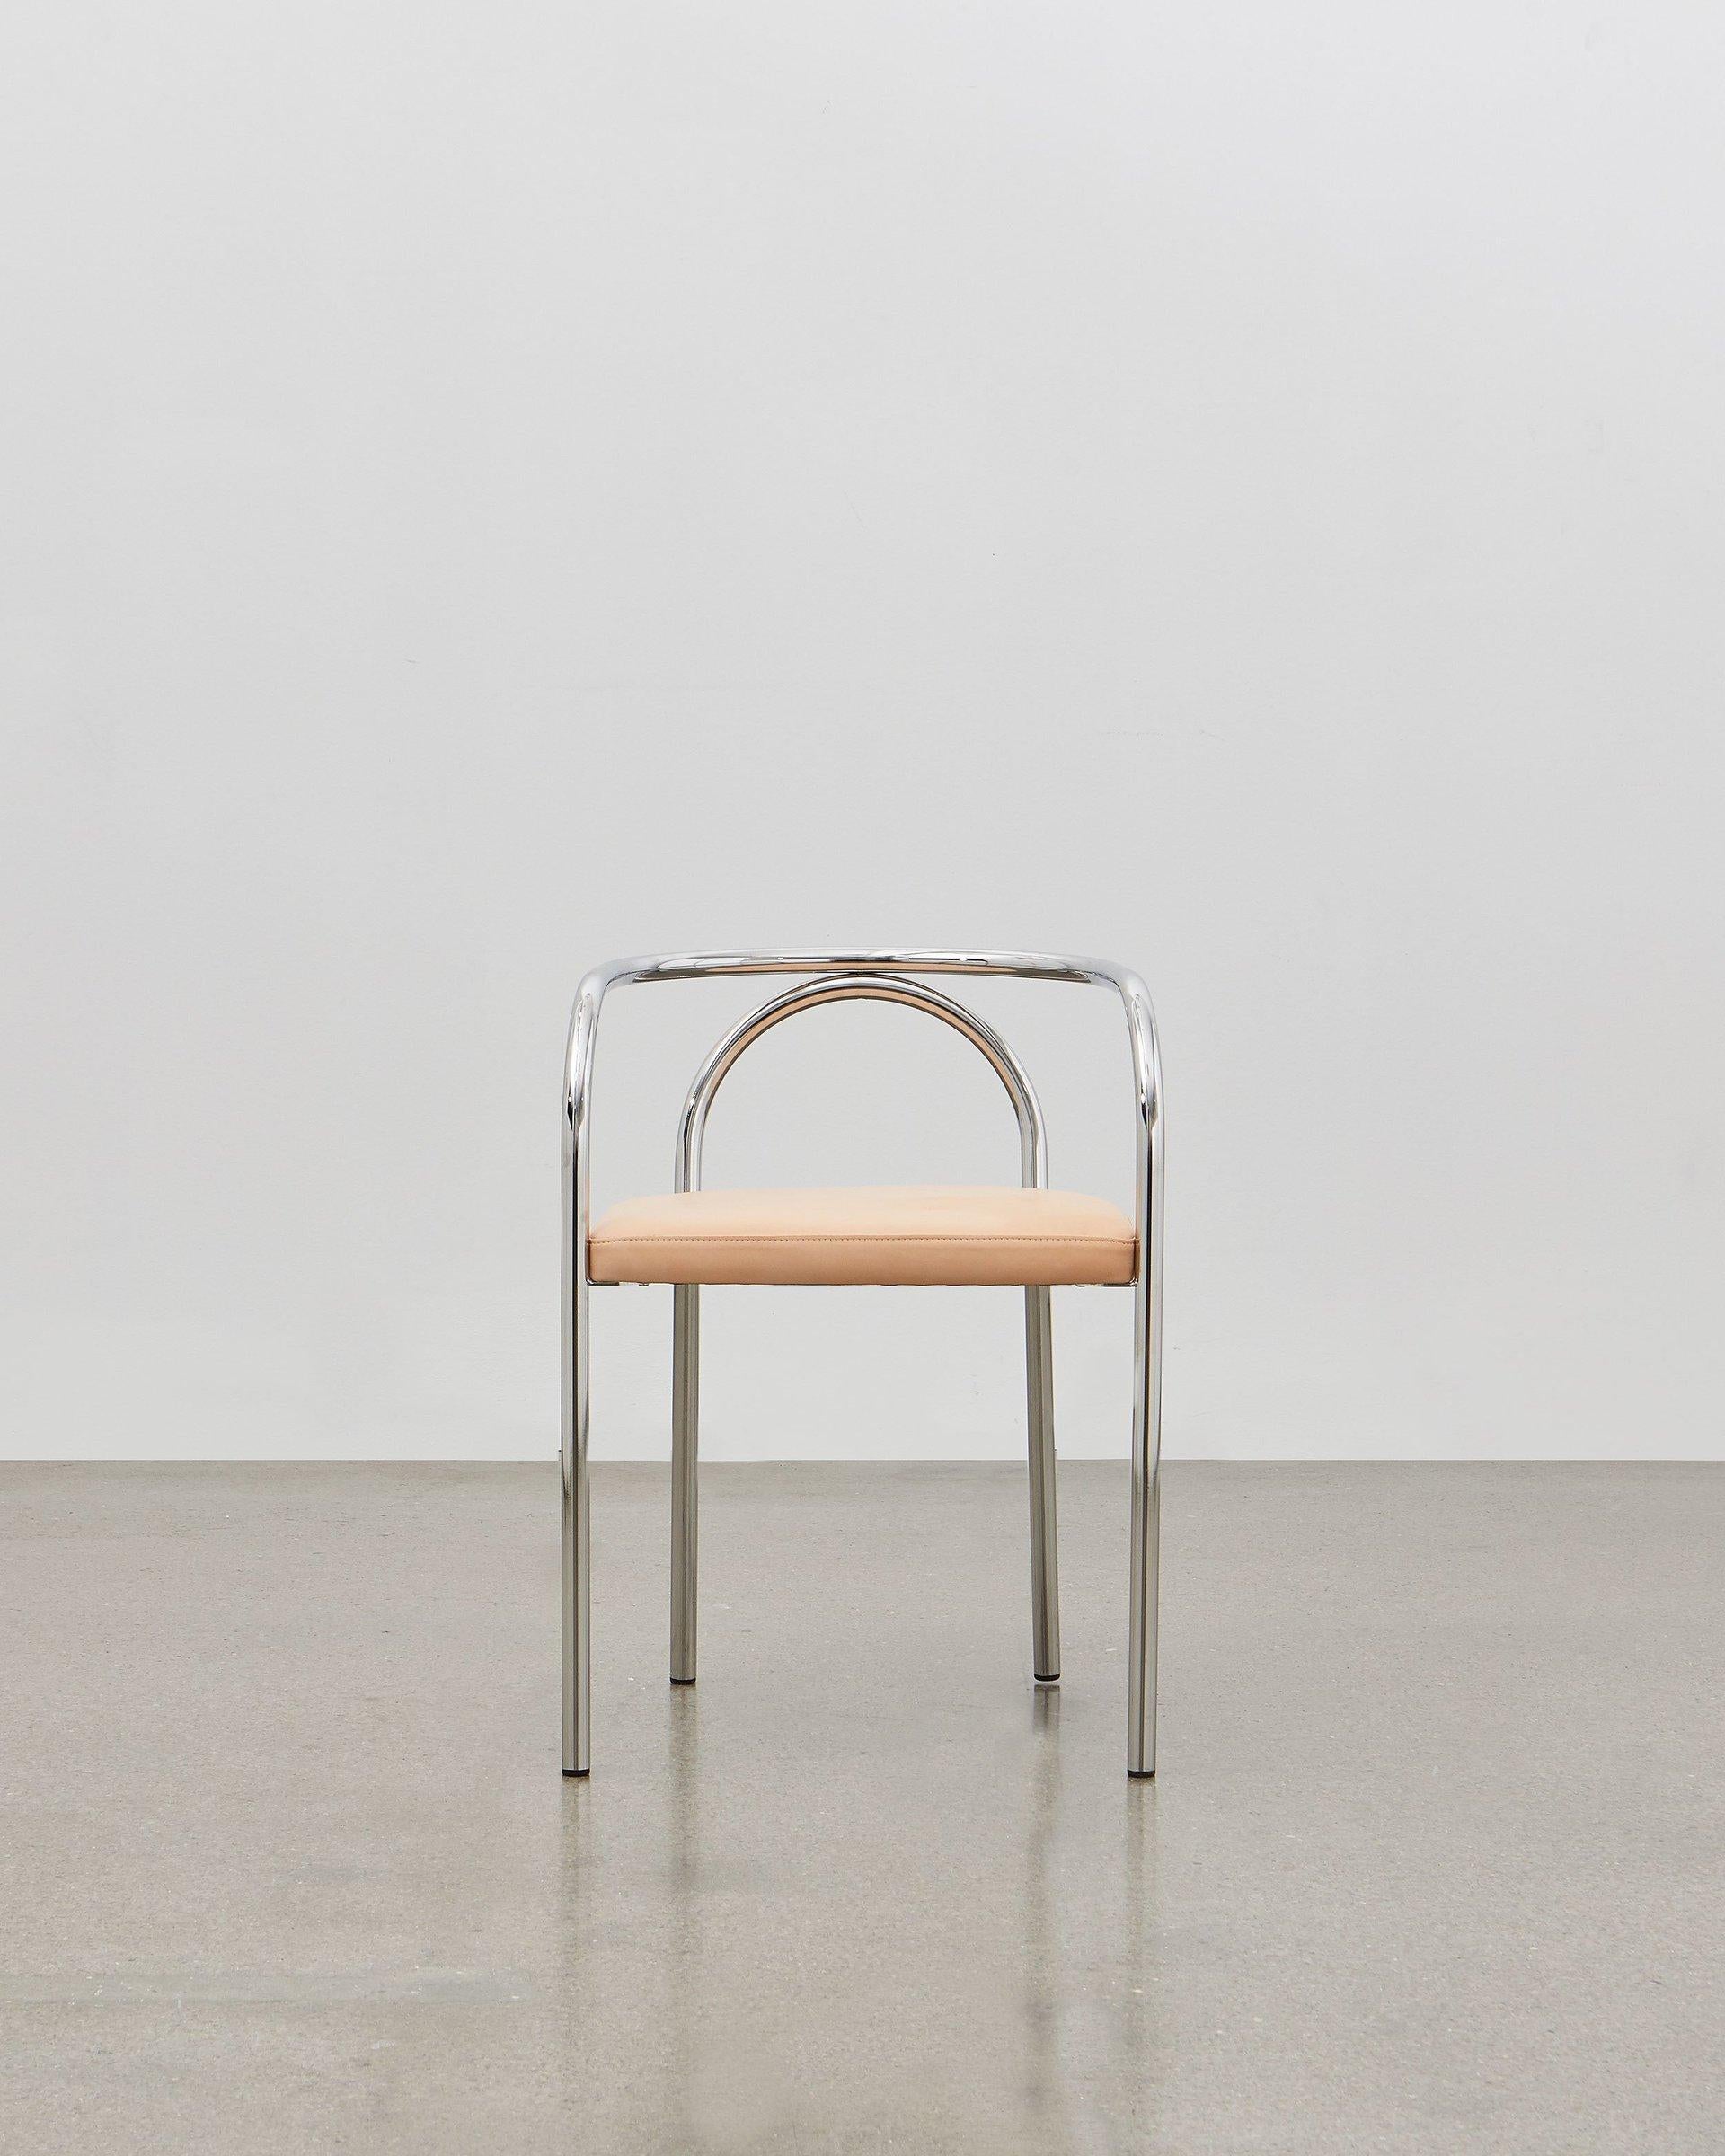 In creating the PH chair, Poul Henningsen sought to reinvent a number of Classic furniture designs that had traditionally been constructed of wood, such as the frequently encountered ‘bistro’ chair. Poul Henningsen saw an opportunity to create a